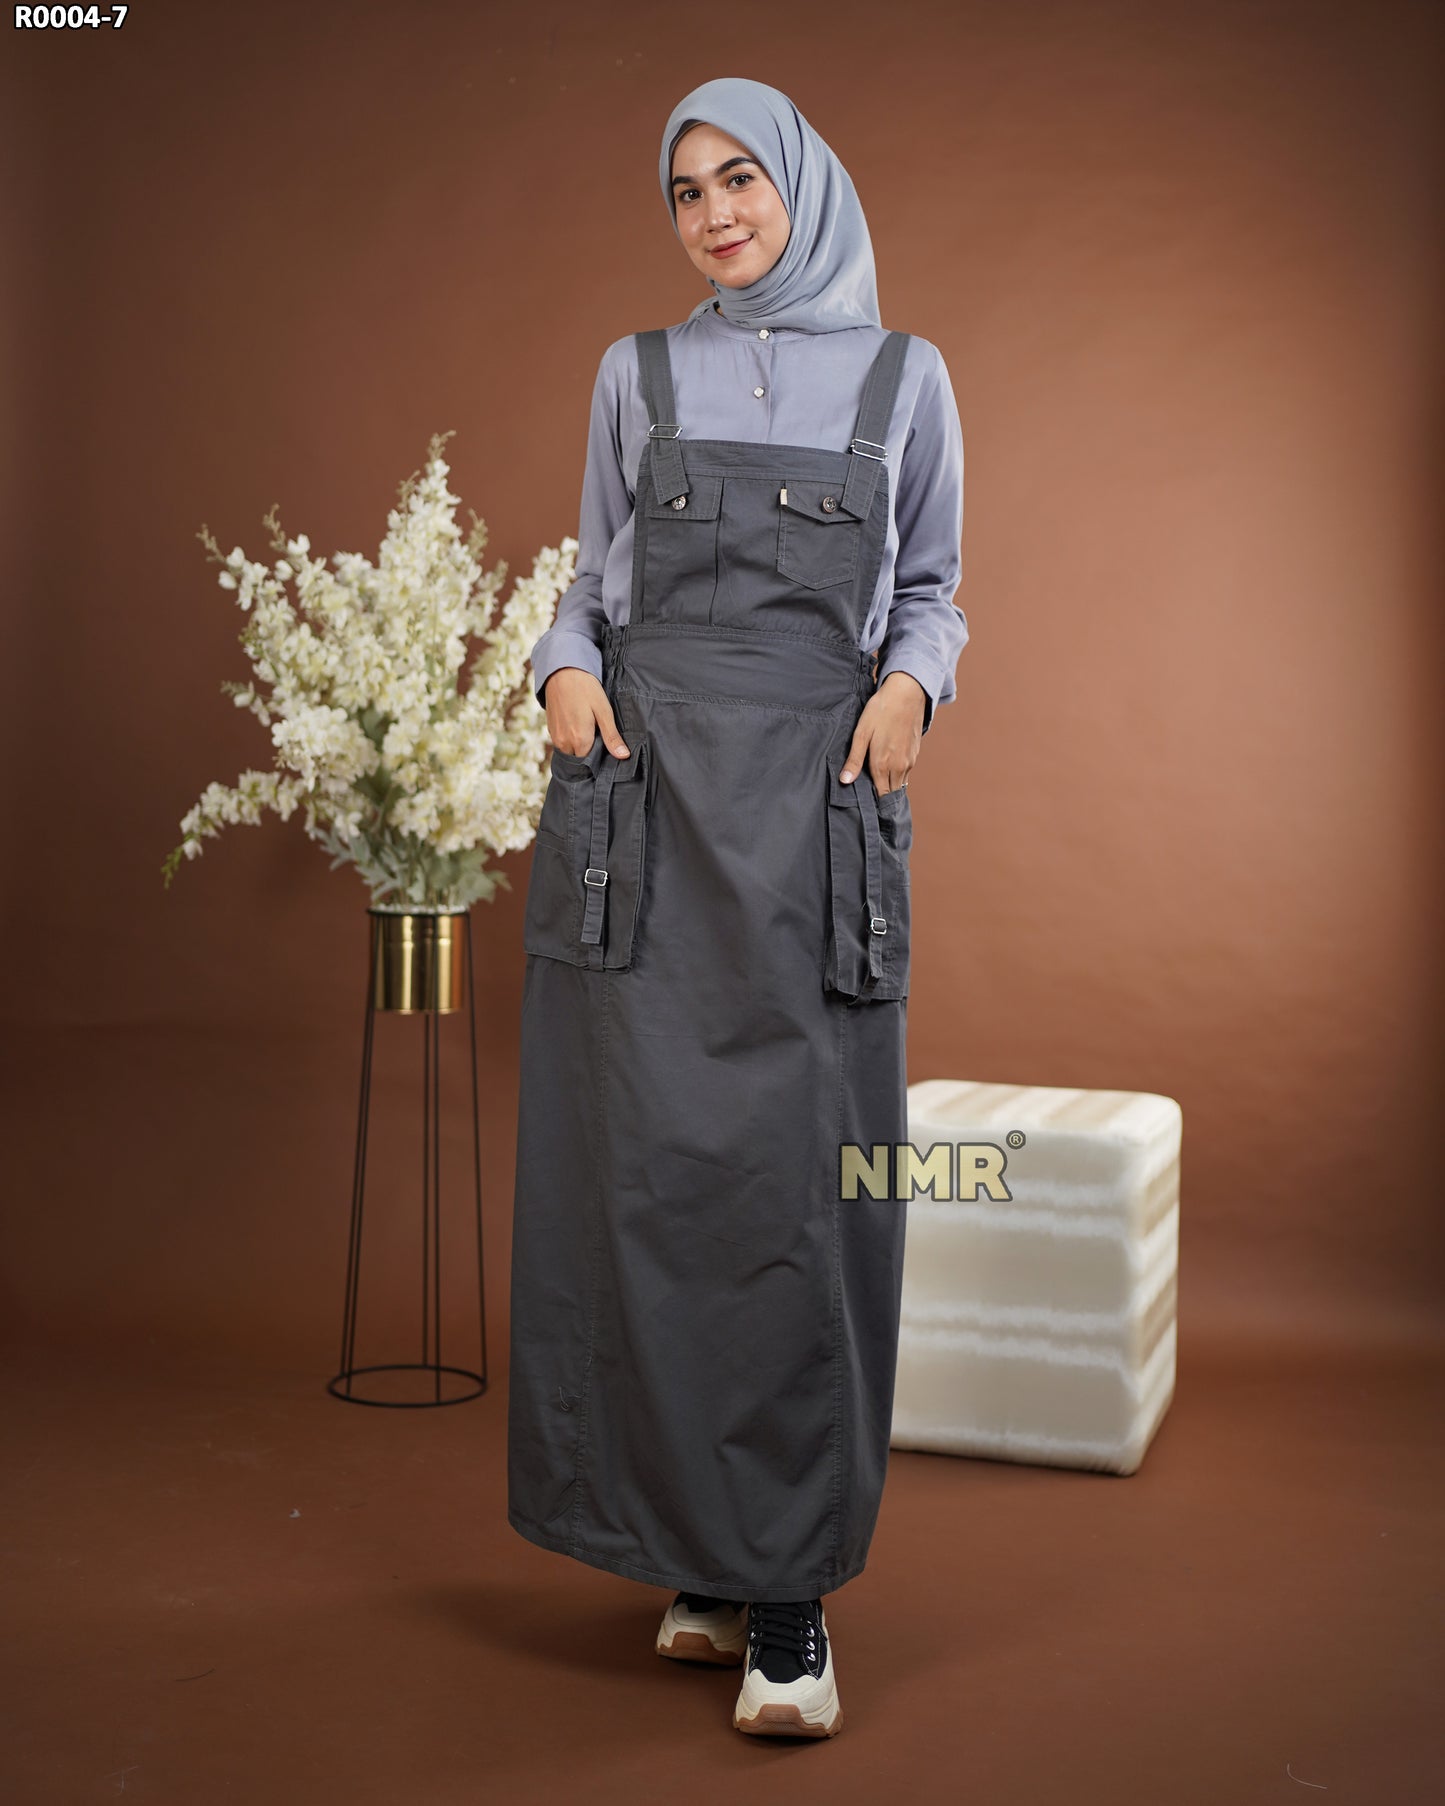 NMR Gamis Jumpsuit Overall Baby Canvas Vol R004-7